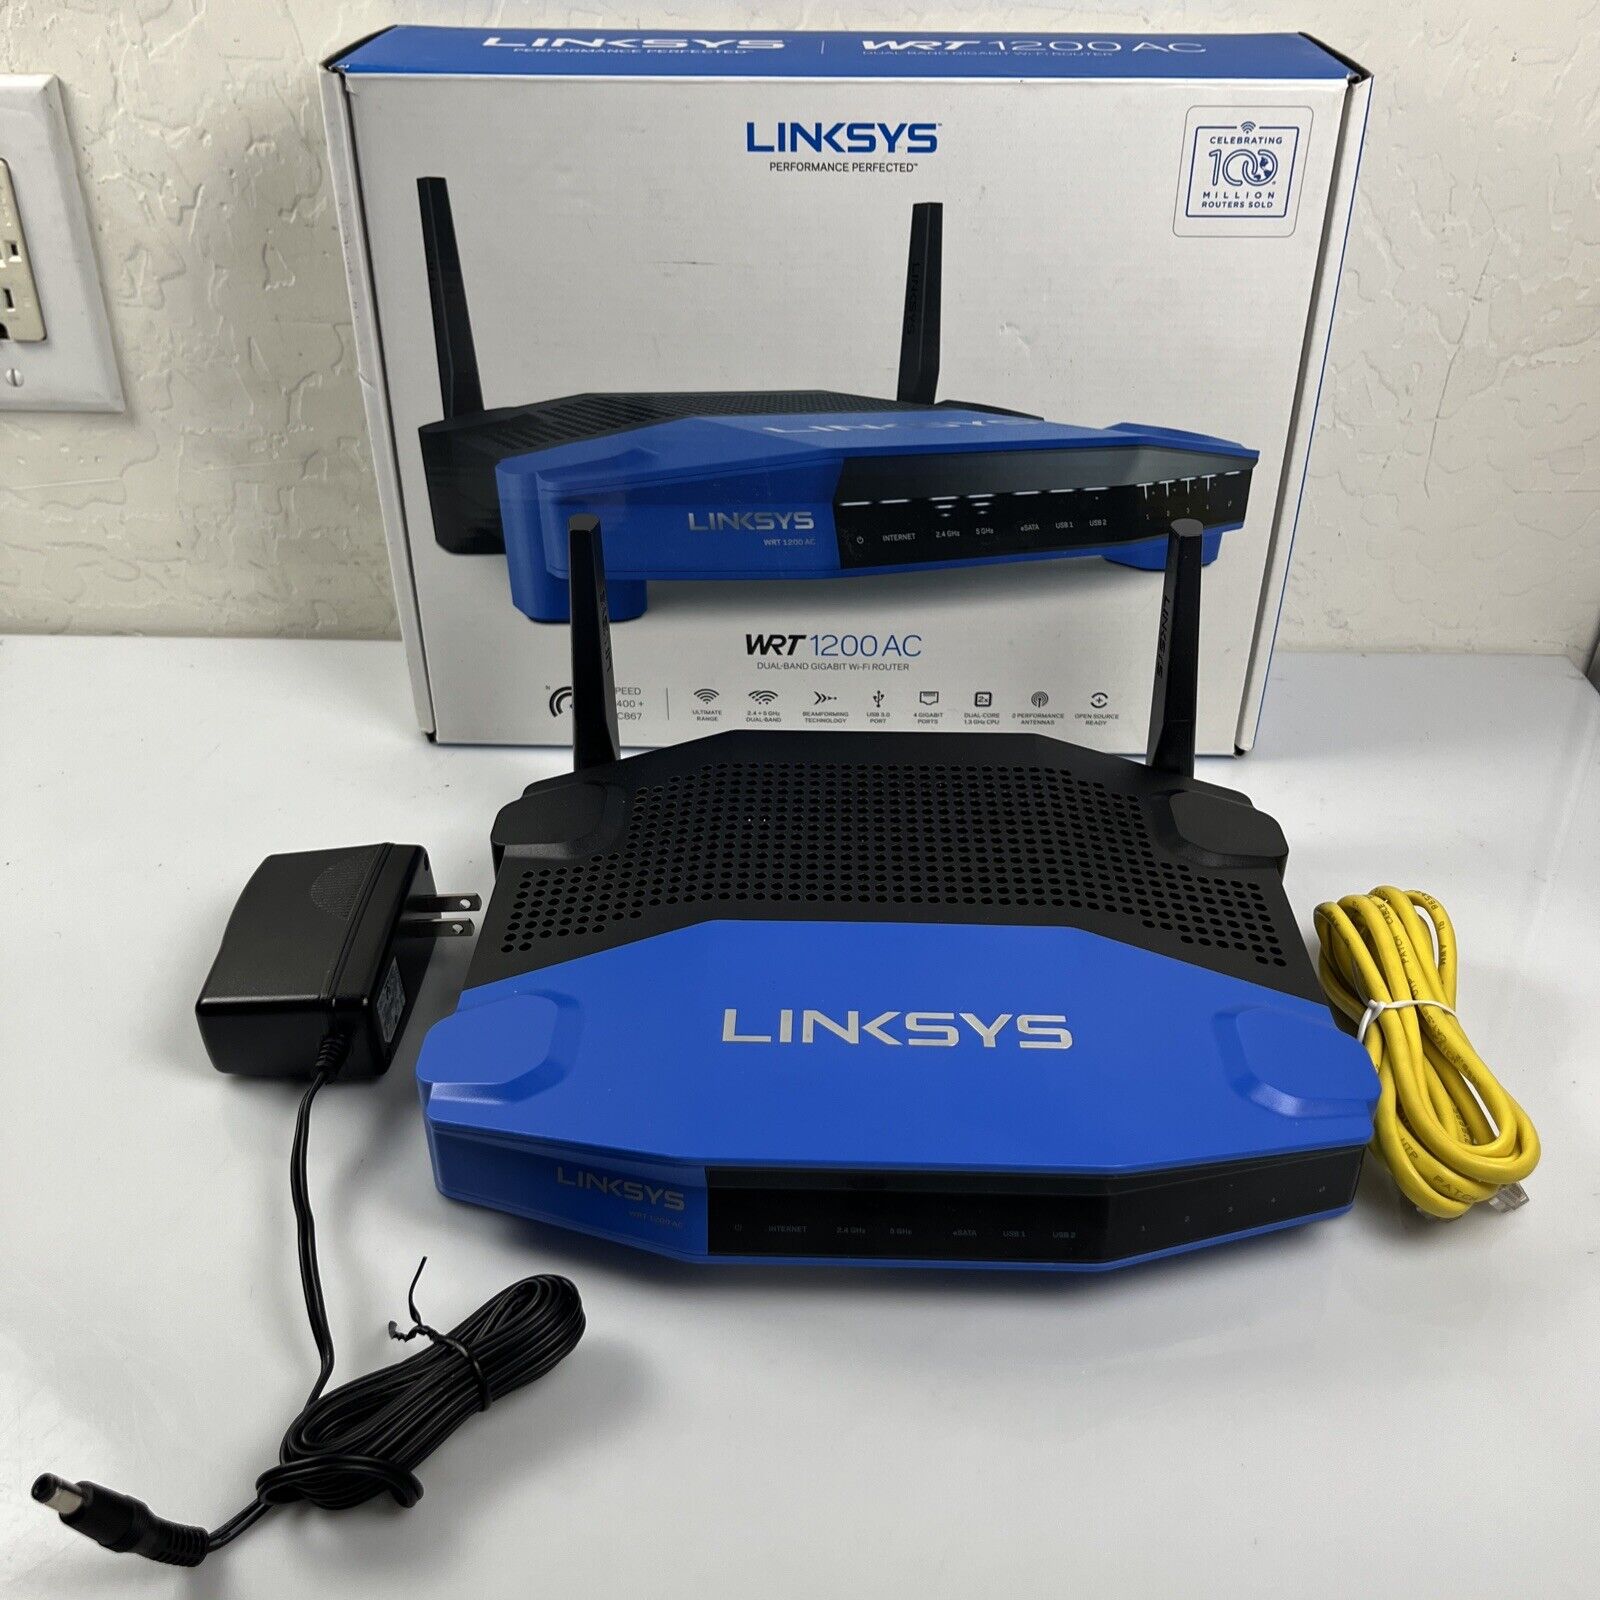 Linksys WRT1200AC 1200 Mbps 4-Port Gigabit Wireless AC Router Tested Works